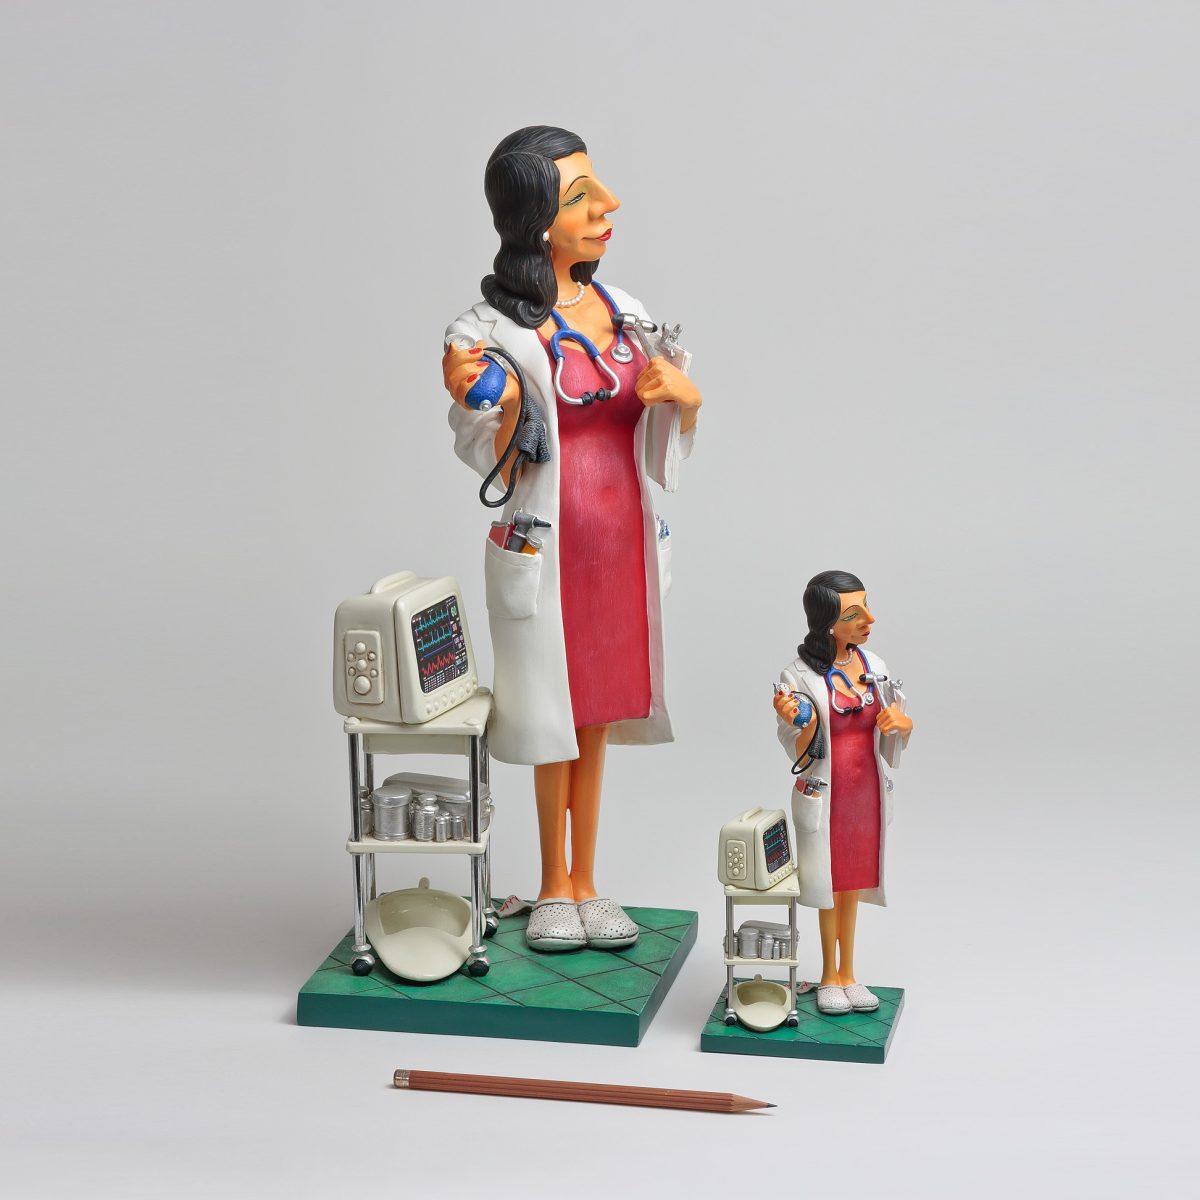 Guillermo Forchino Woman Doctor Miniature Figurines Gifts